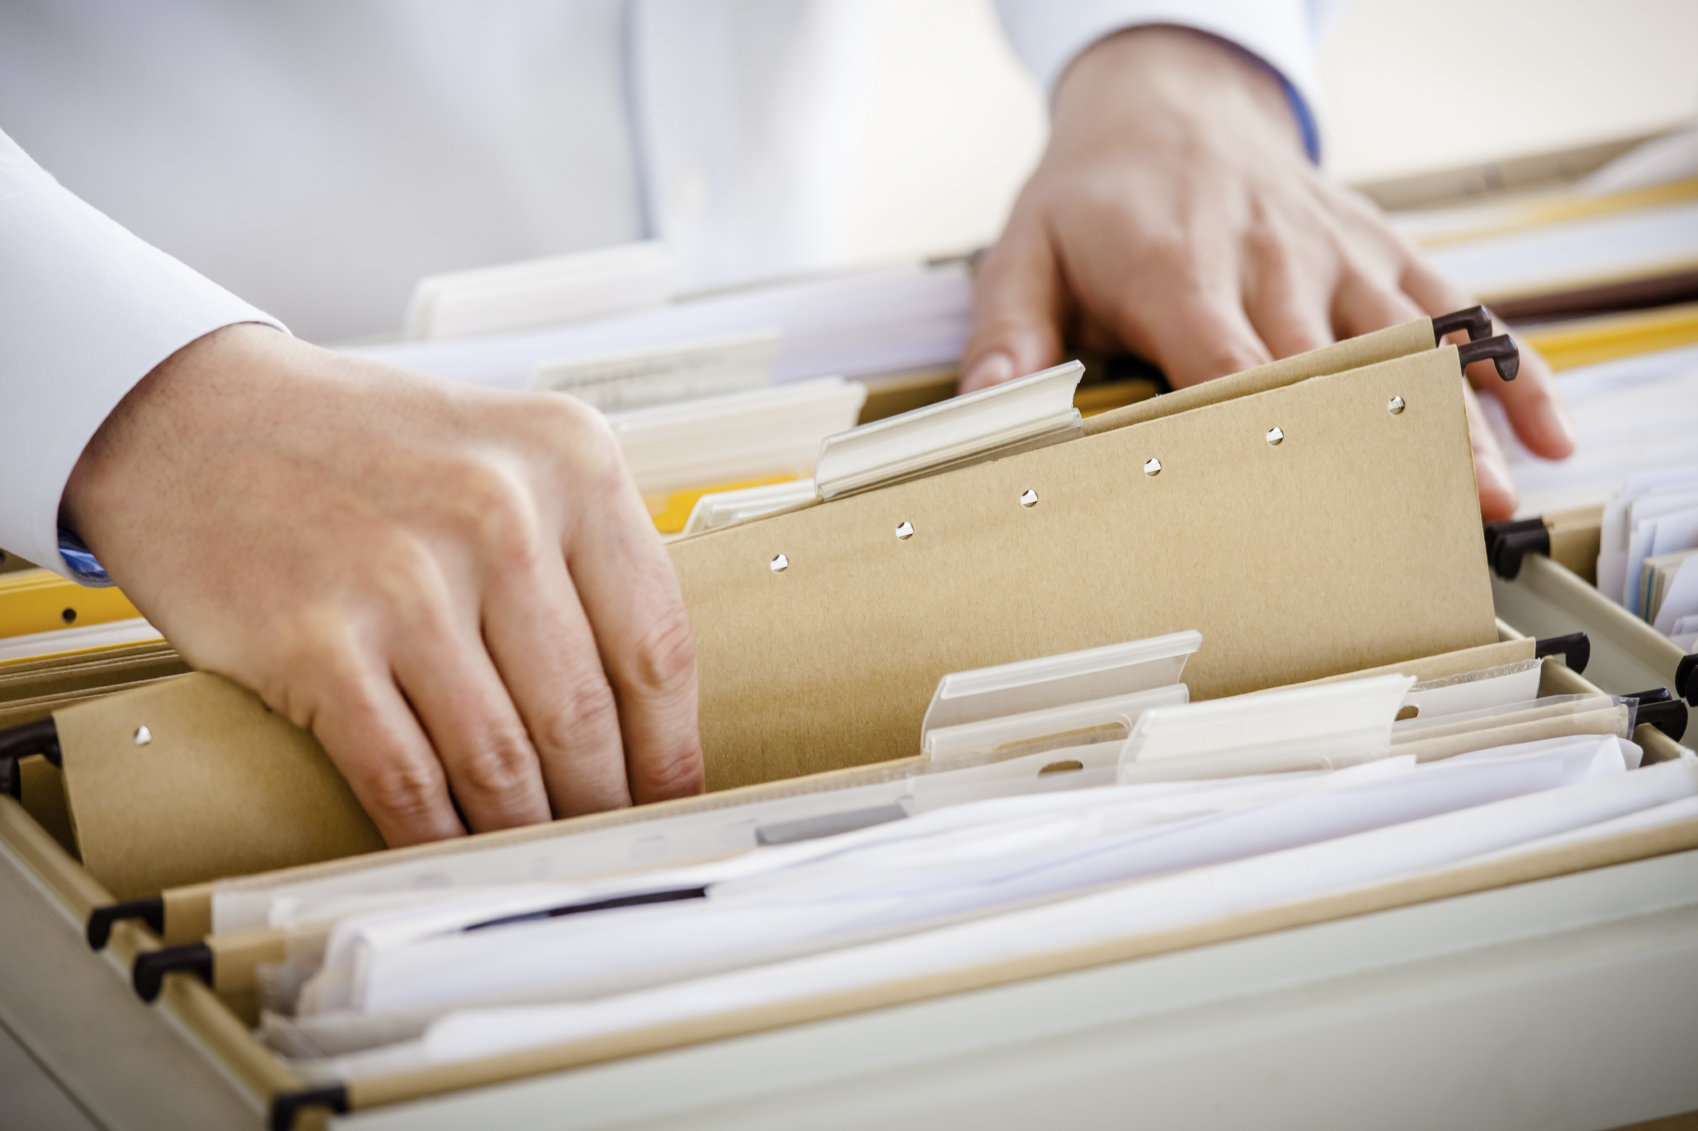 An individual sifting through a file cabinet of multiple manilla file folders